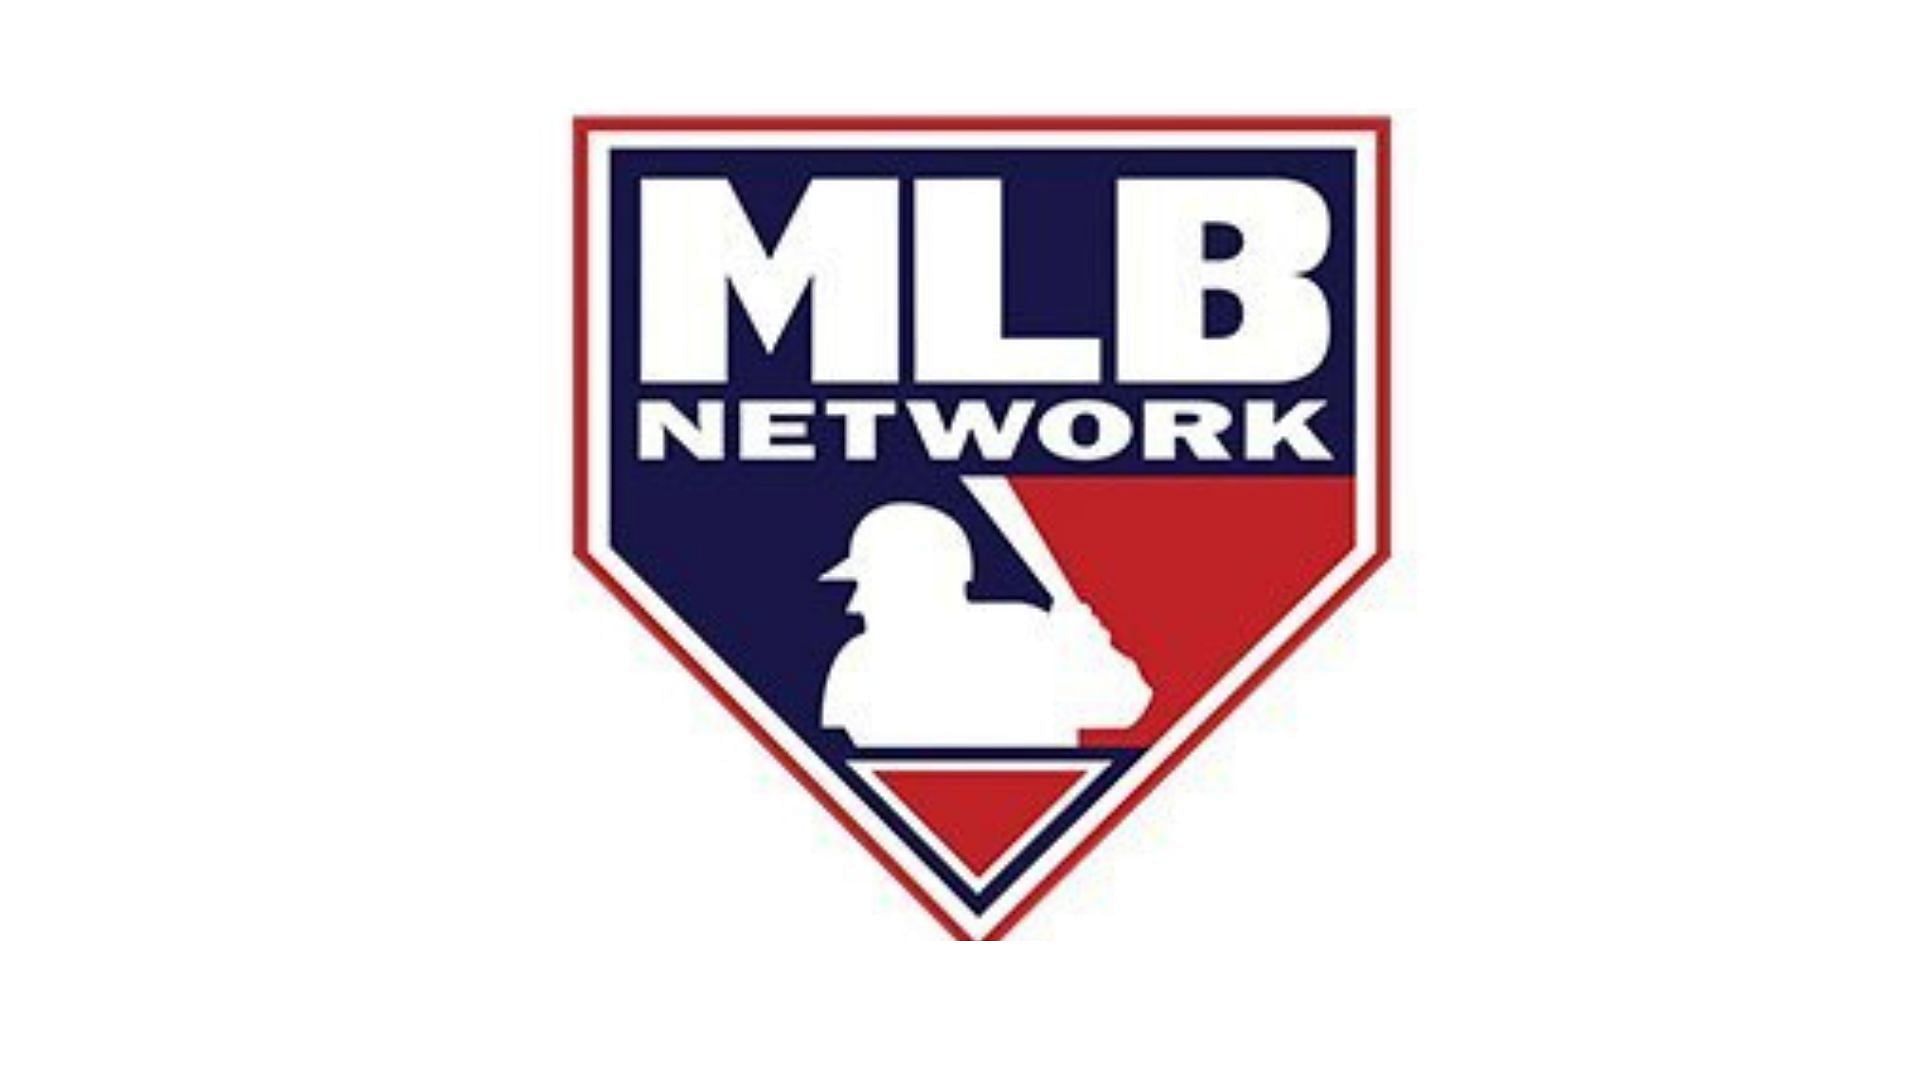 The MLB Network is the best place to watch MLB games